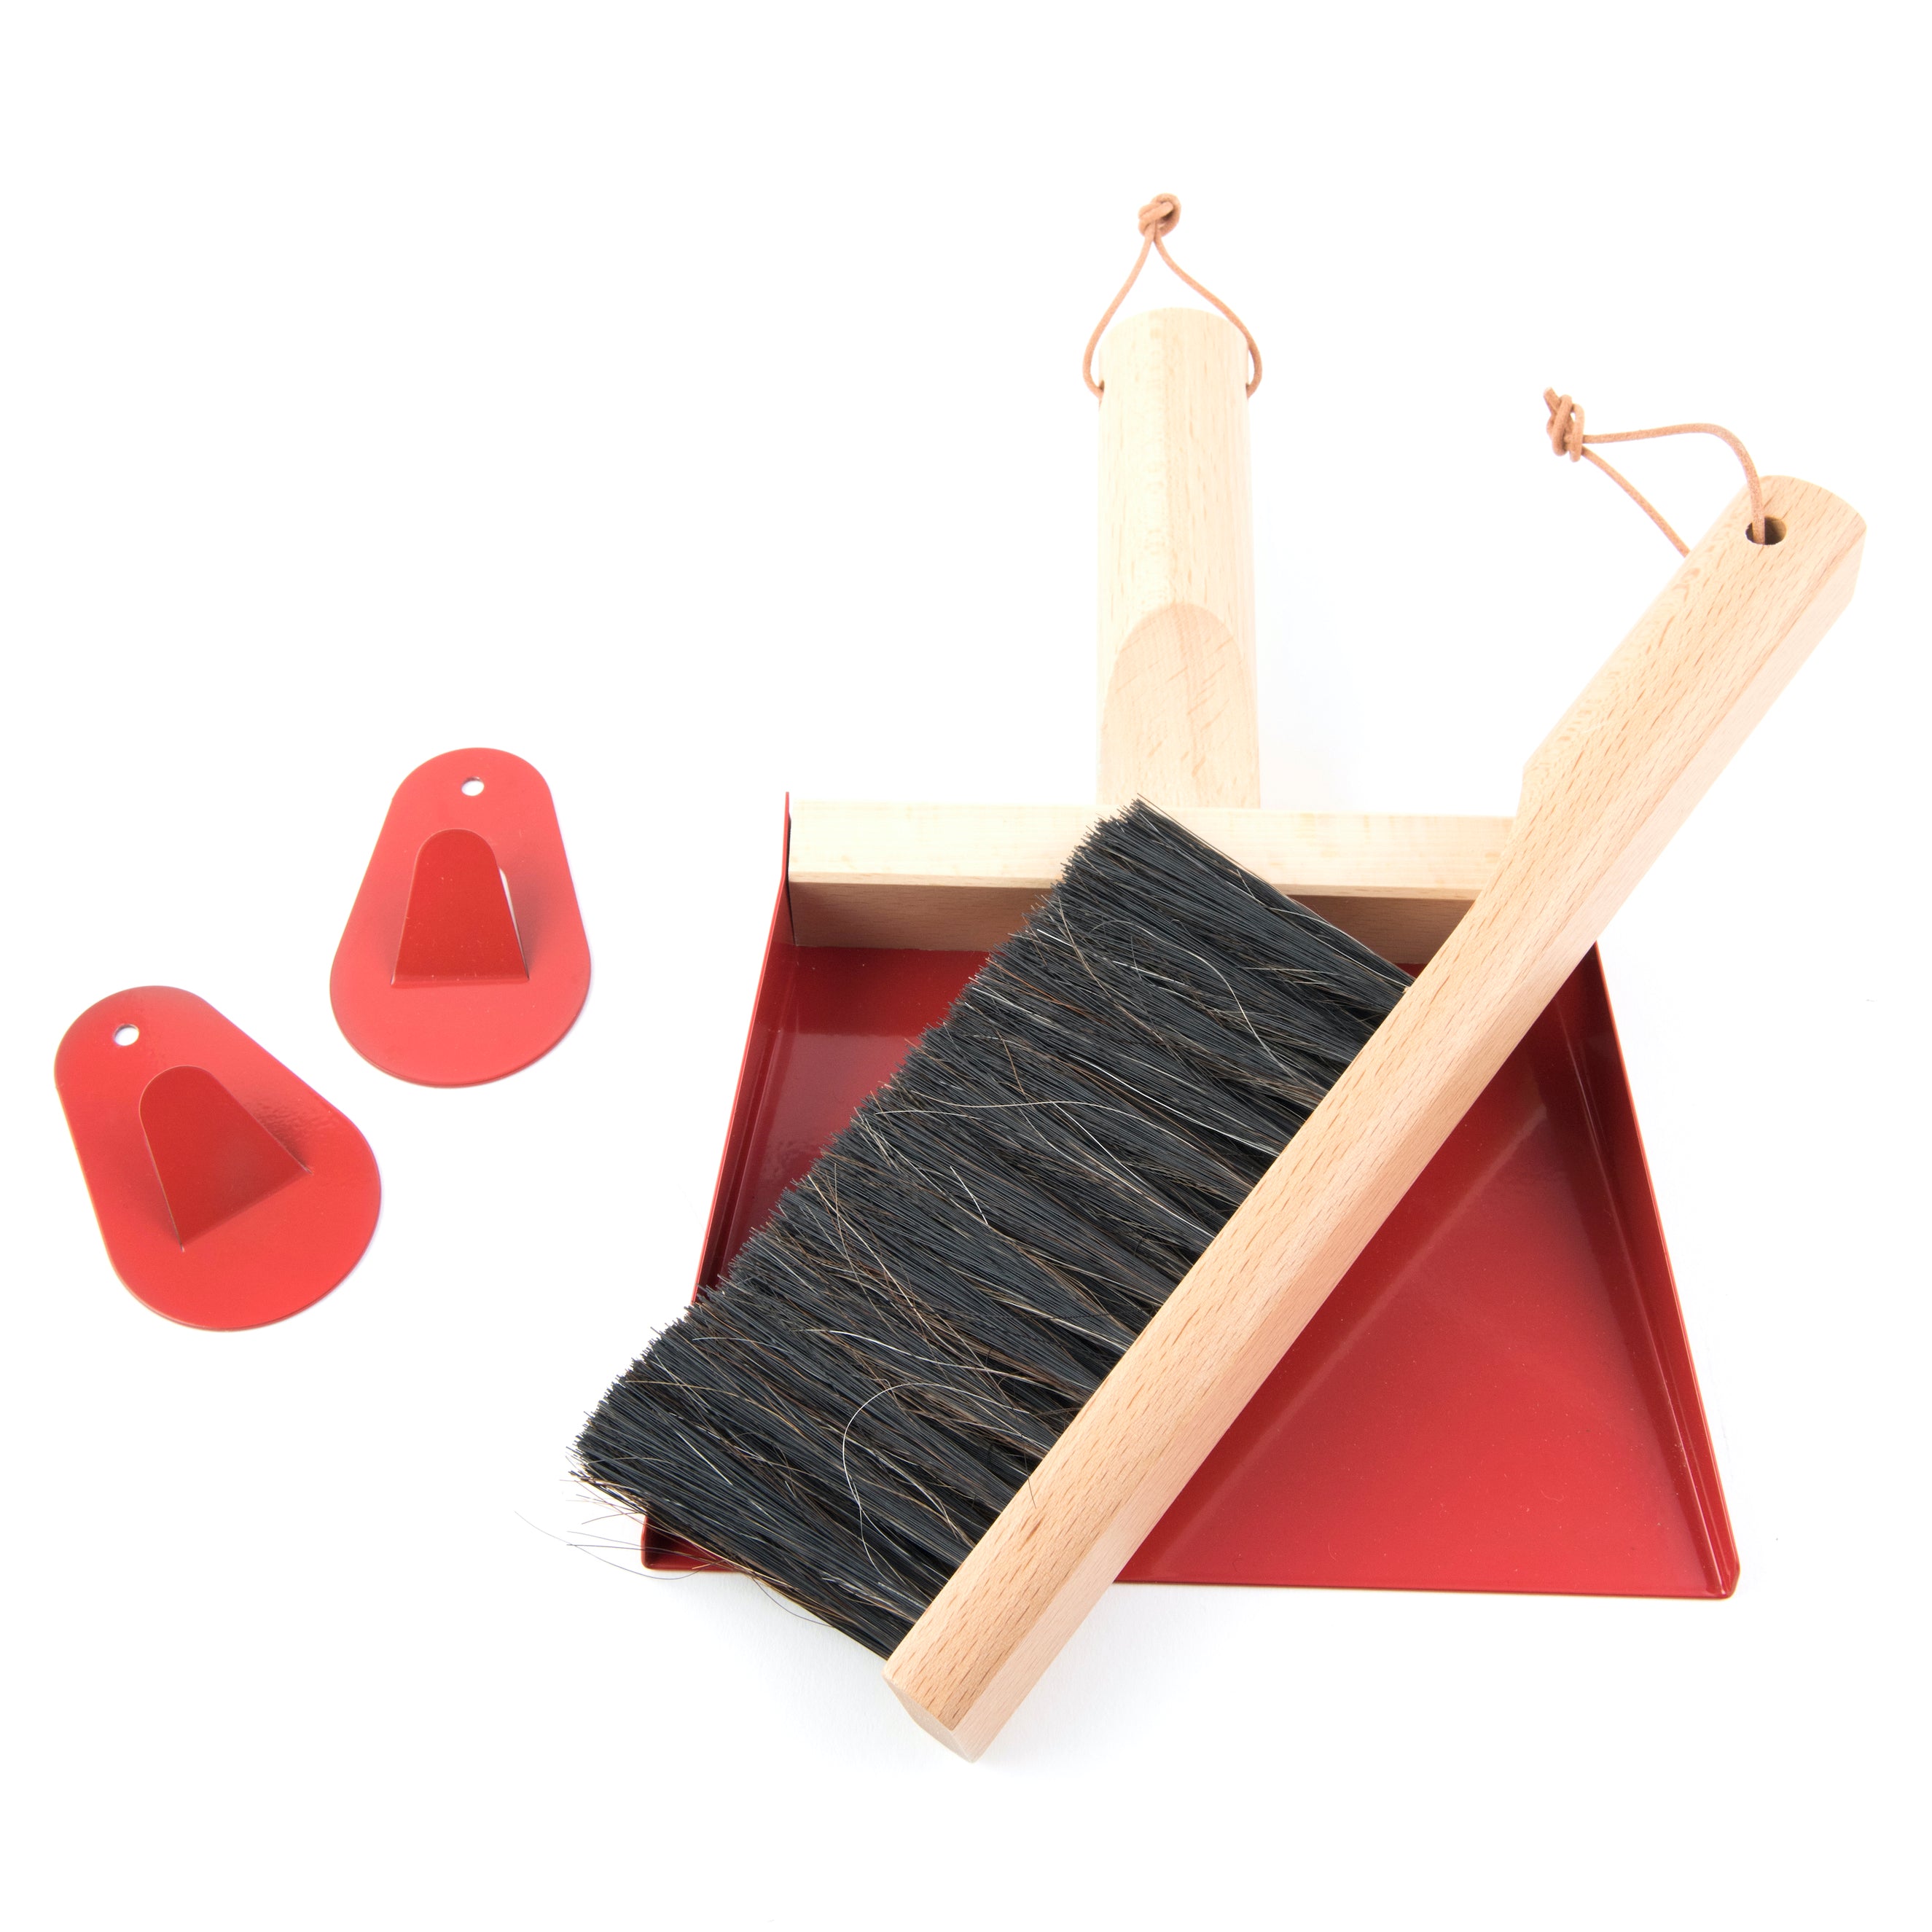 Andrée Jardin Mr. and Mrs. Clynk Dustpan & Brush "Coffret" Gift Set with Wall Hooks Red Utilities Andrée Jardin Brand_Andrée Jardin Home_Broom Sets Home_Household Cleaning New Arrivals DSC2798_LGAndreeJardinMr.andMrs.ClynkDustpan_Brush_Coffret_GiftSetwithWallHooksrougered